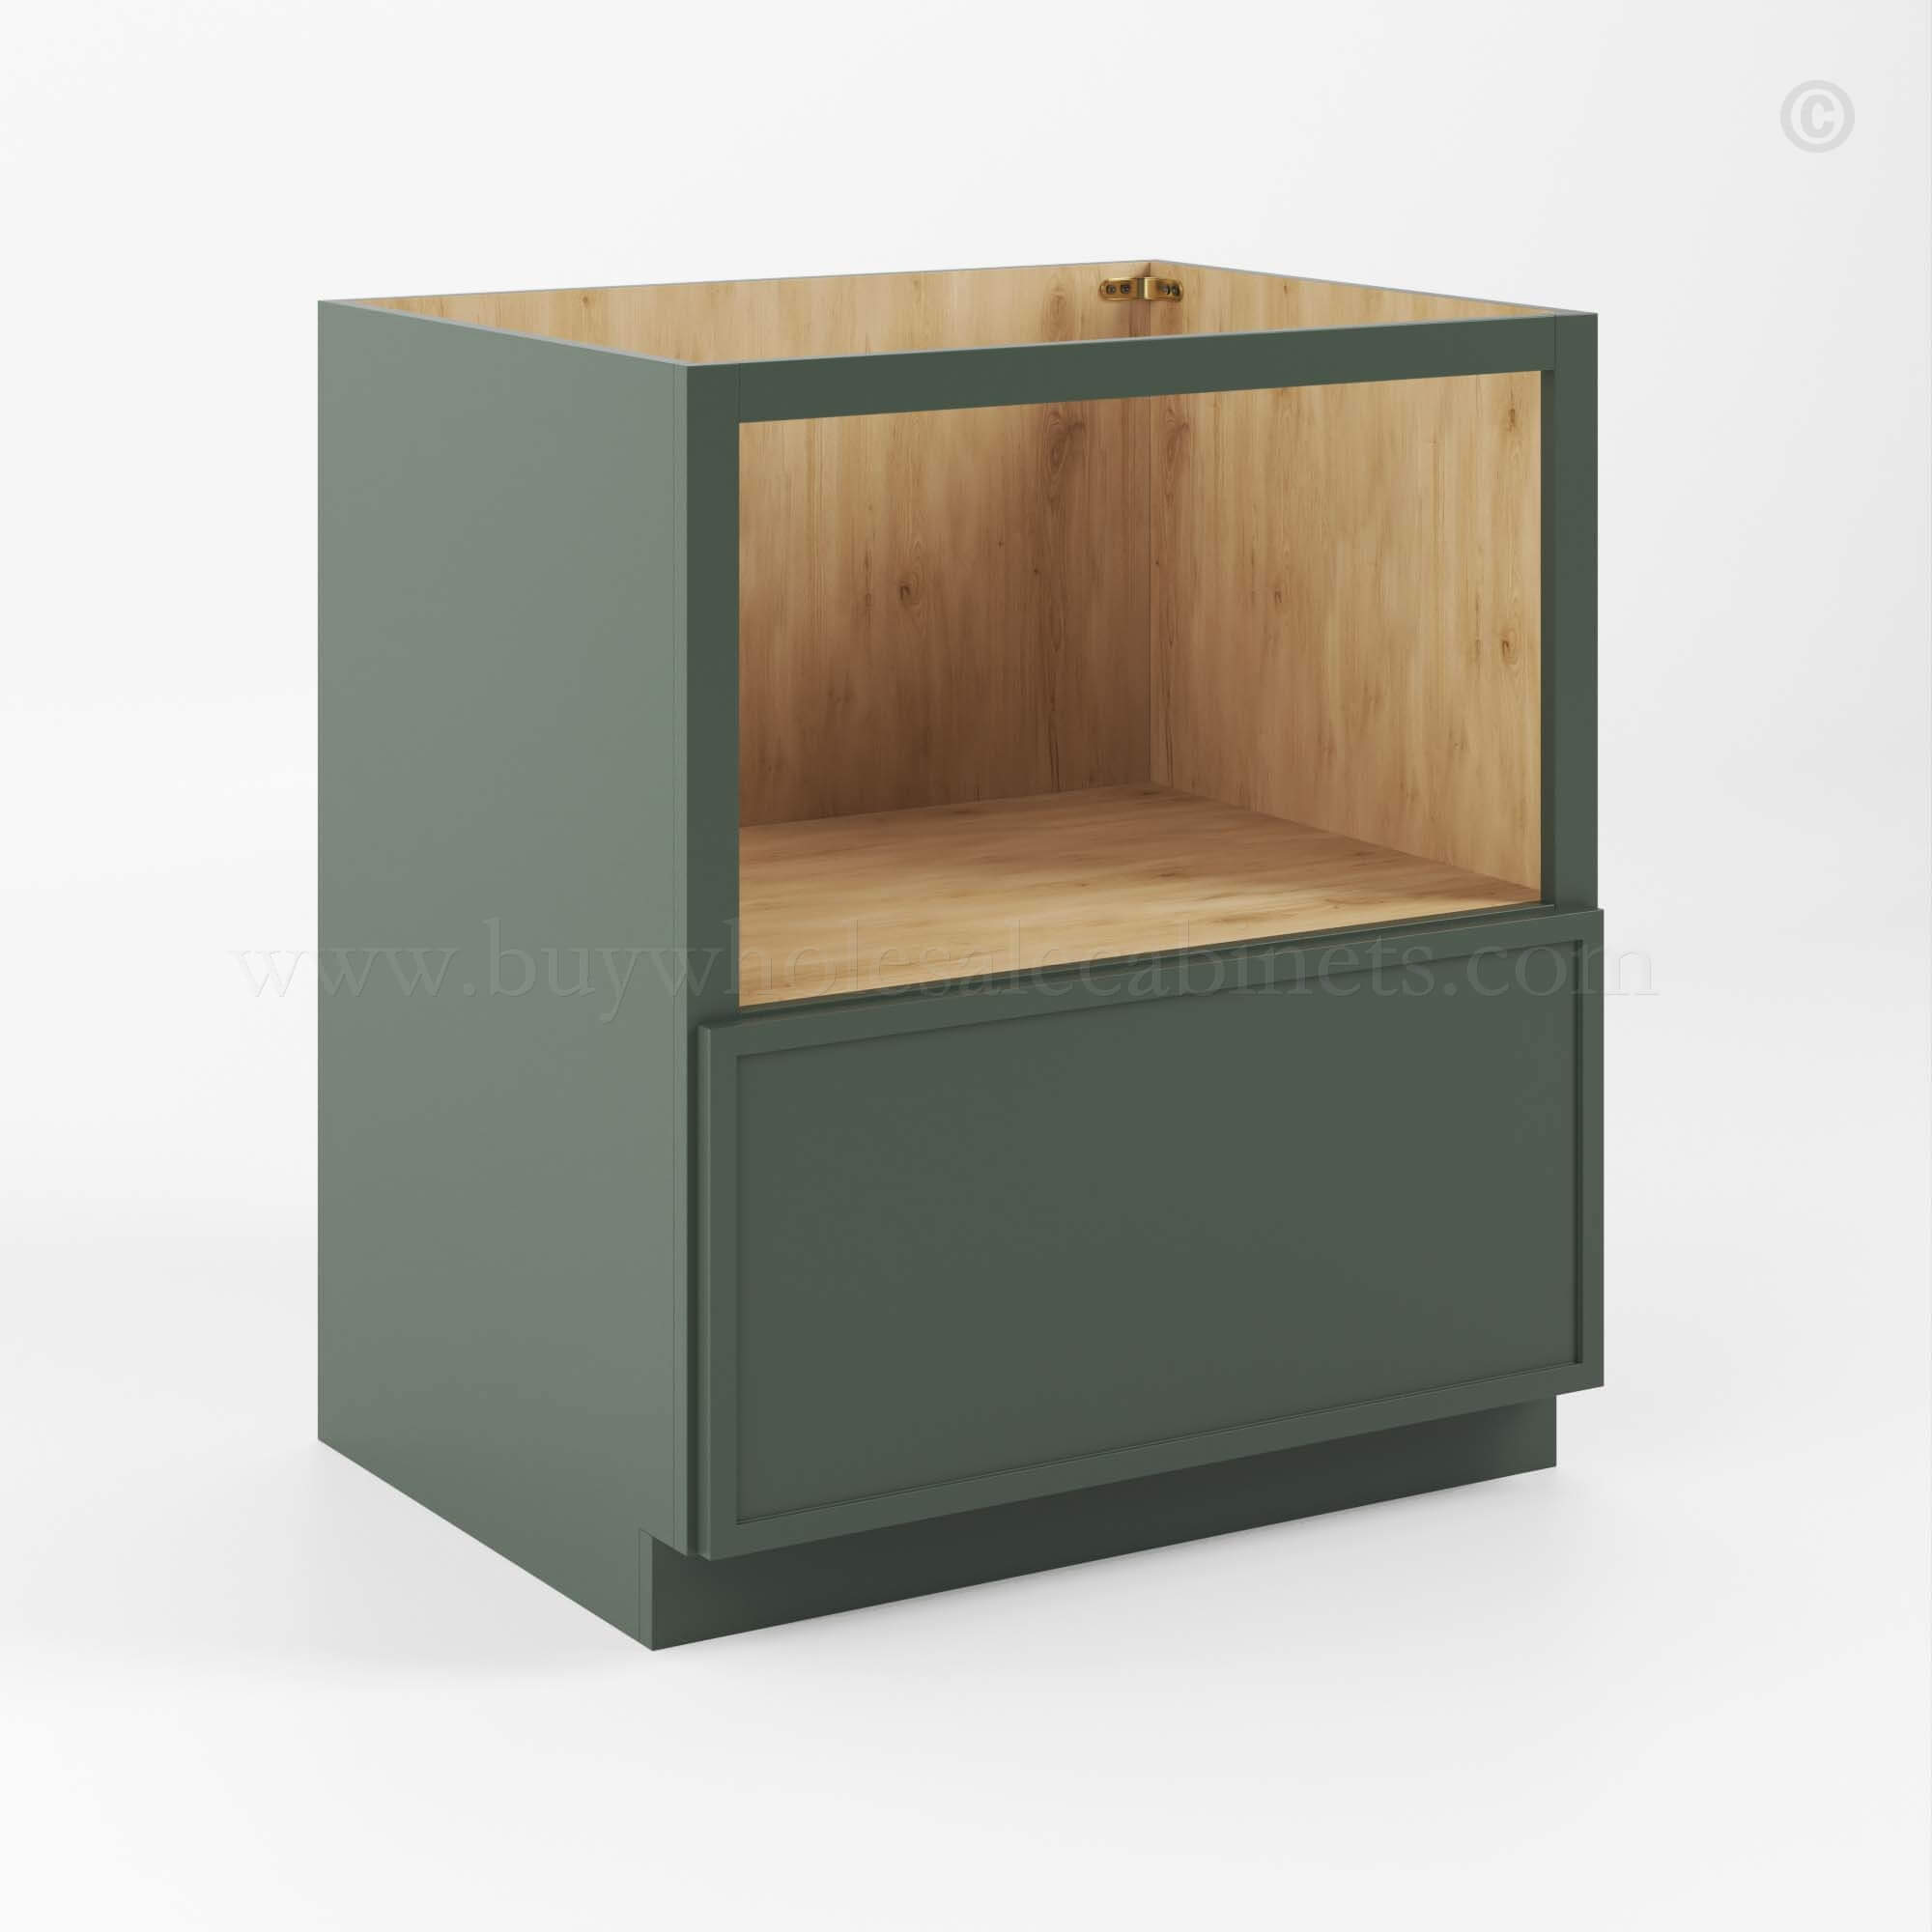 Slim Shaker Green Base Microwave Cabinet, rta cabinets, wholesale cabinets